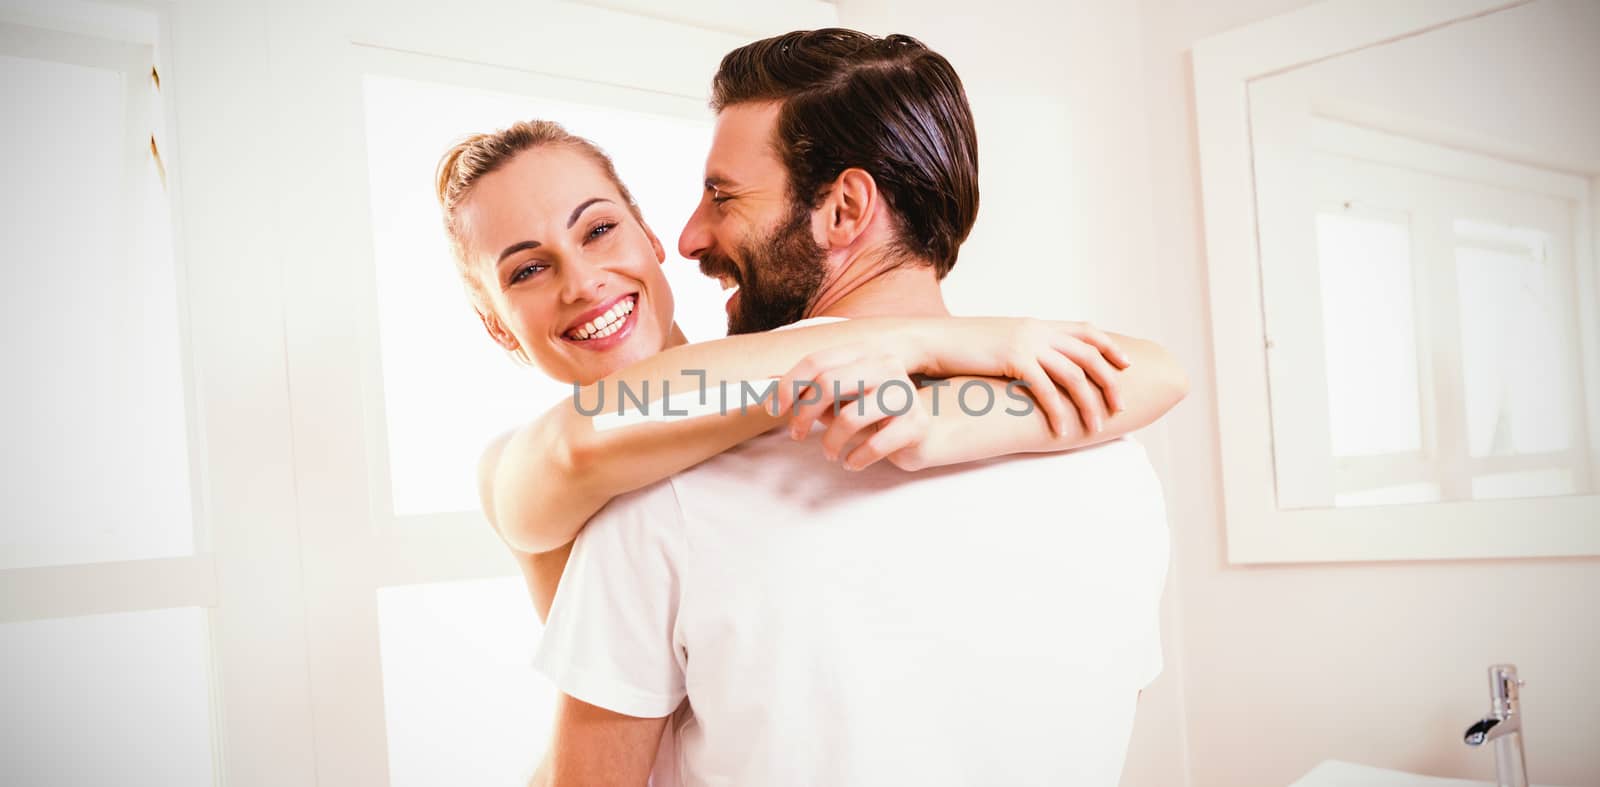 Woman holding pregnancy test while embracing man at home